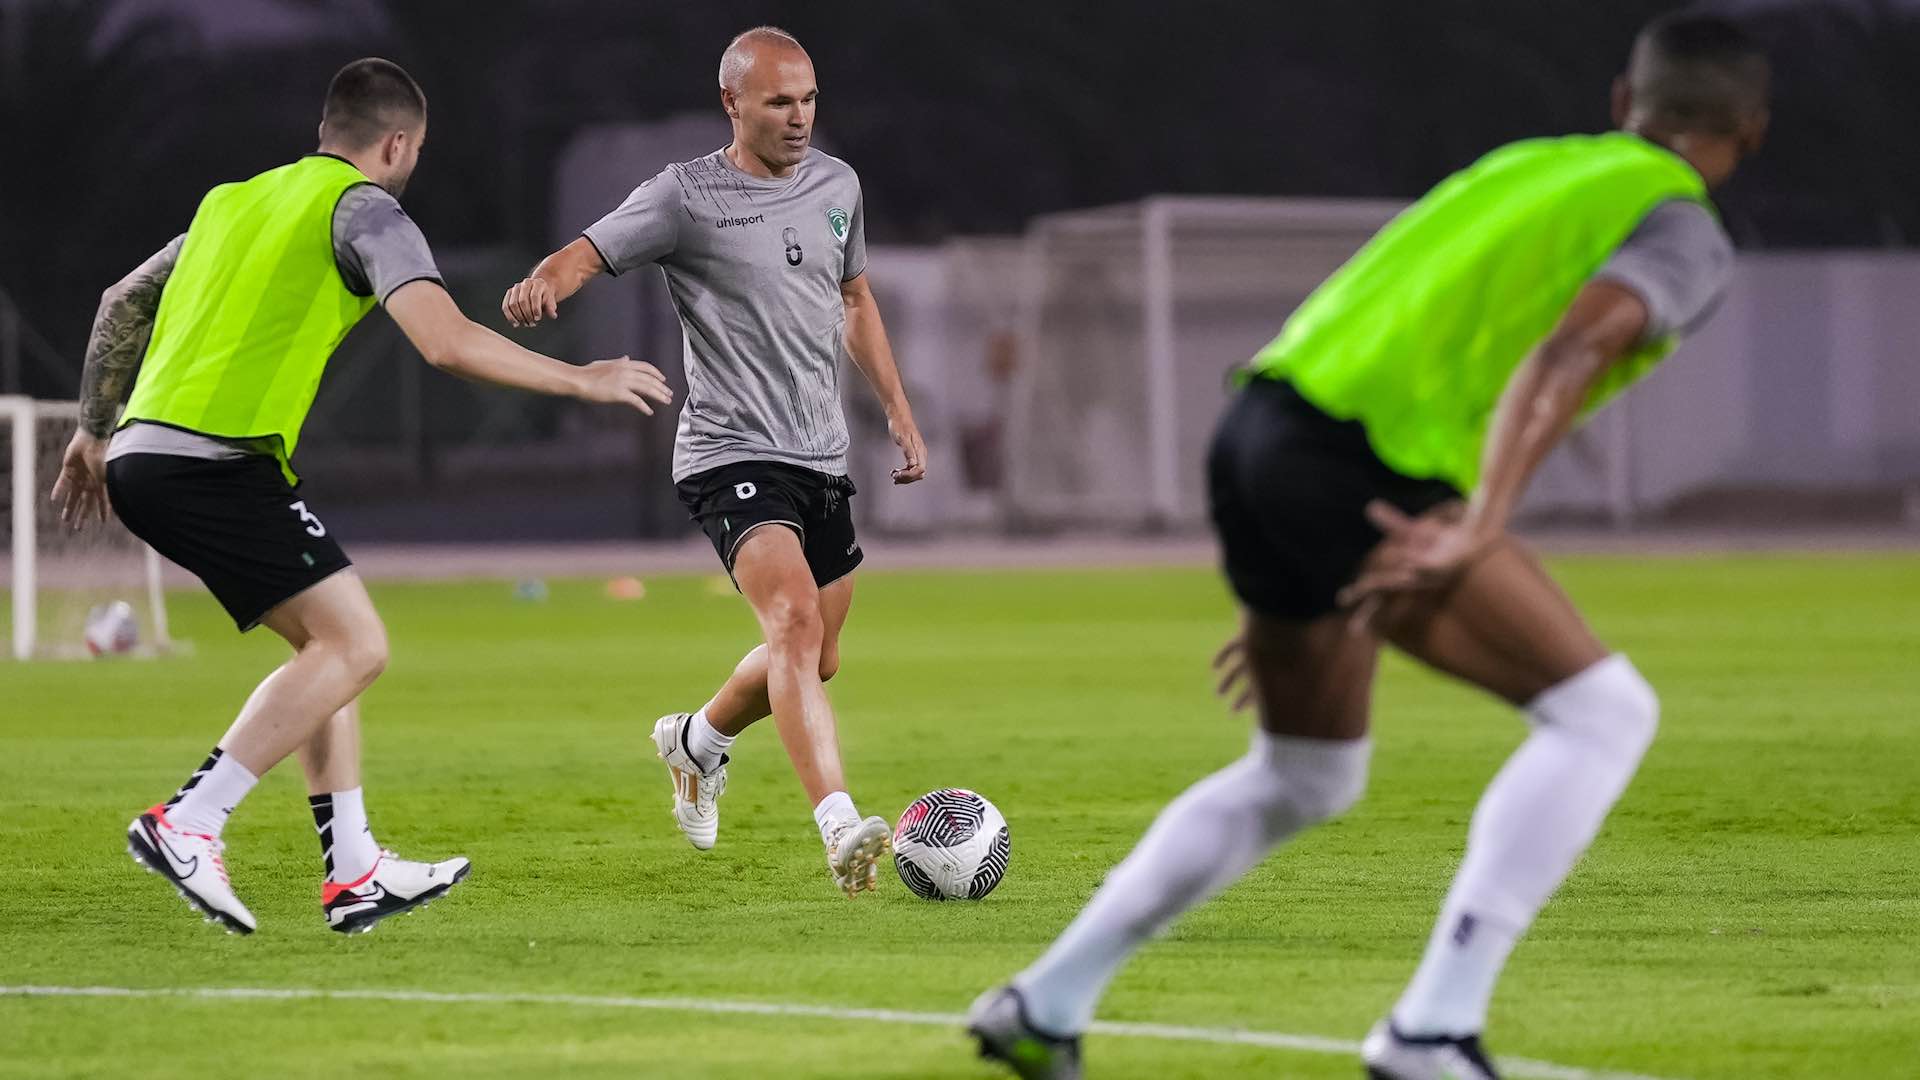 World Cup hero Iniesta's highly anticipated debut in the UAE